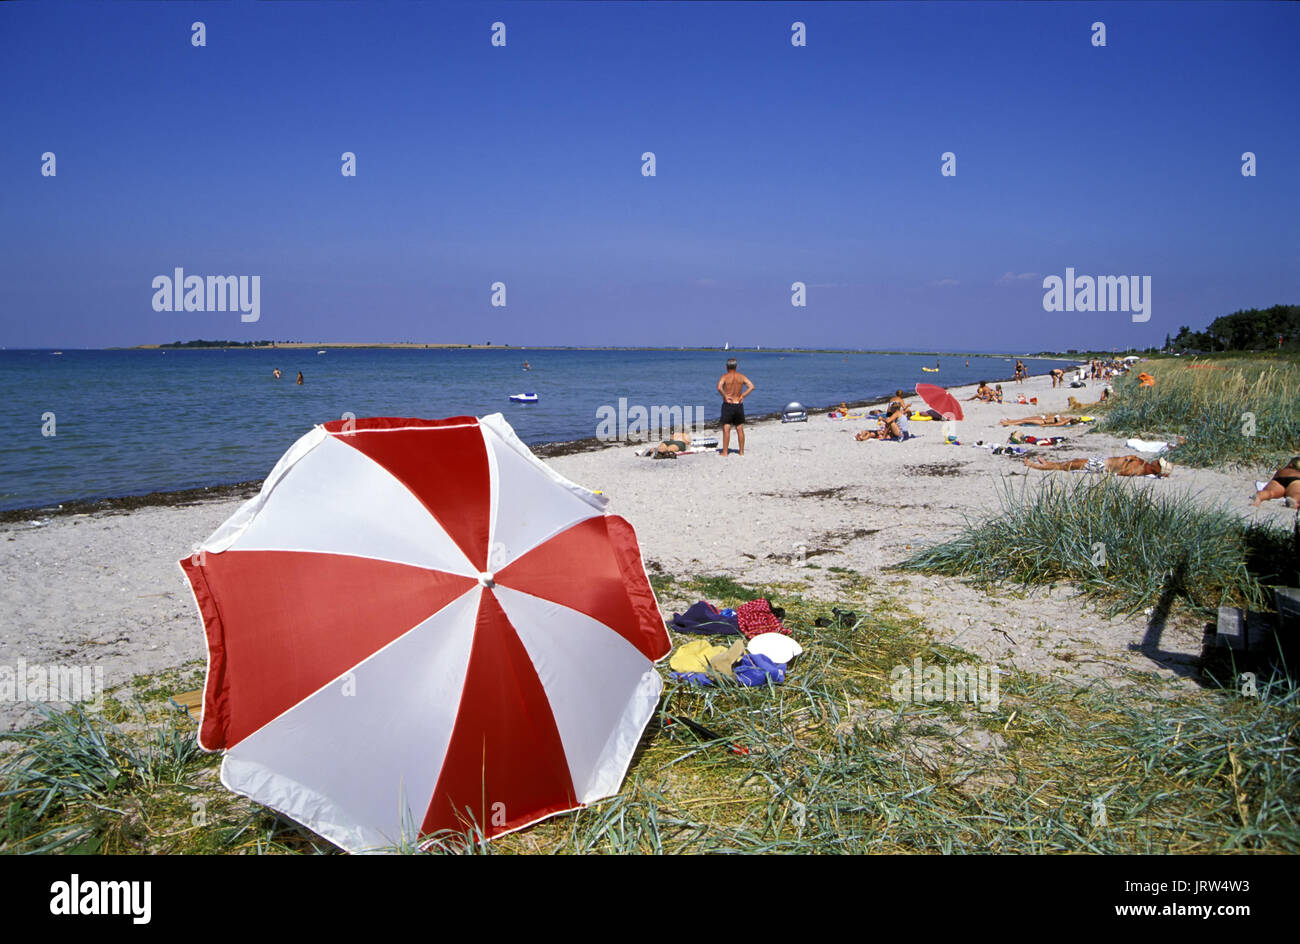 Vester High Resolution Stock Photography and Images - Alamy